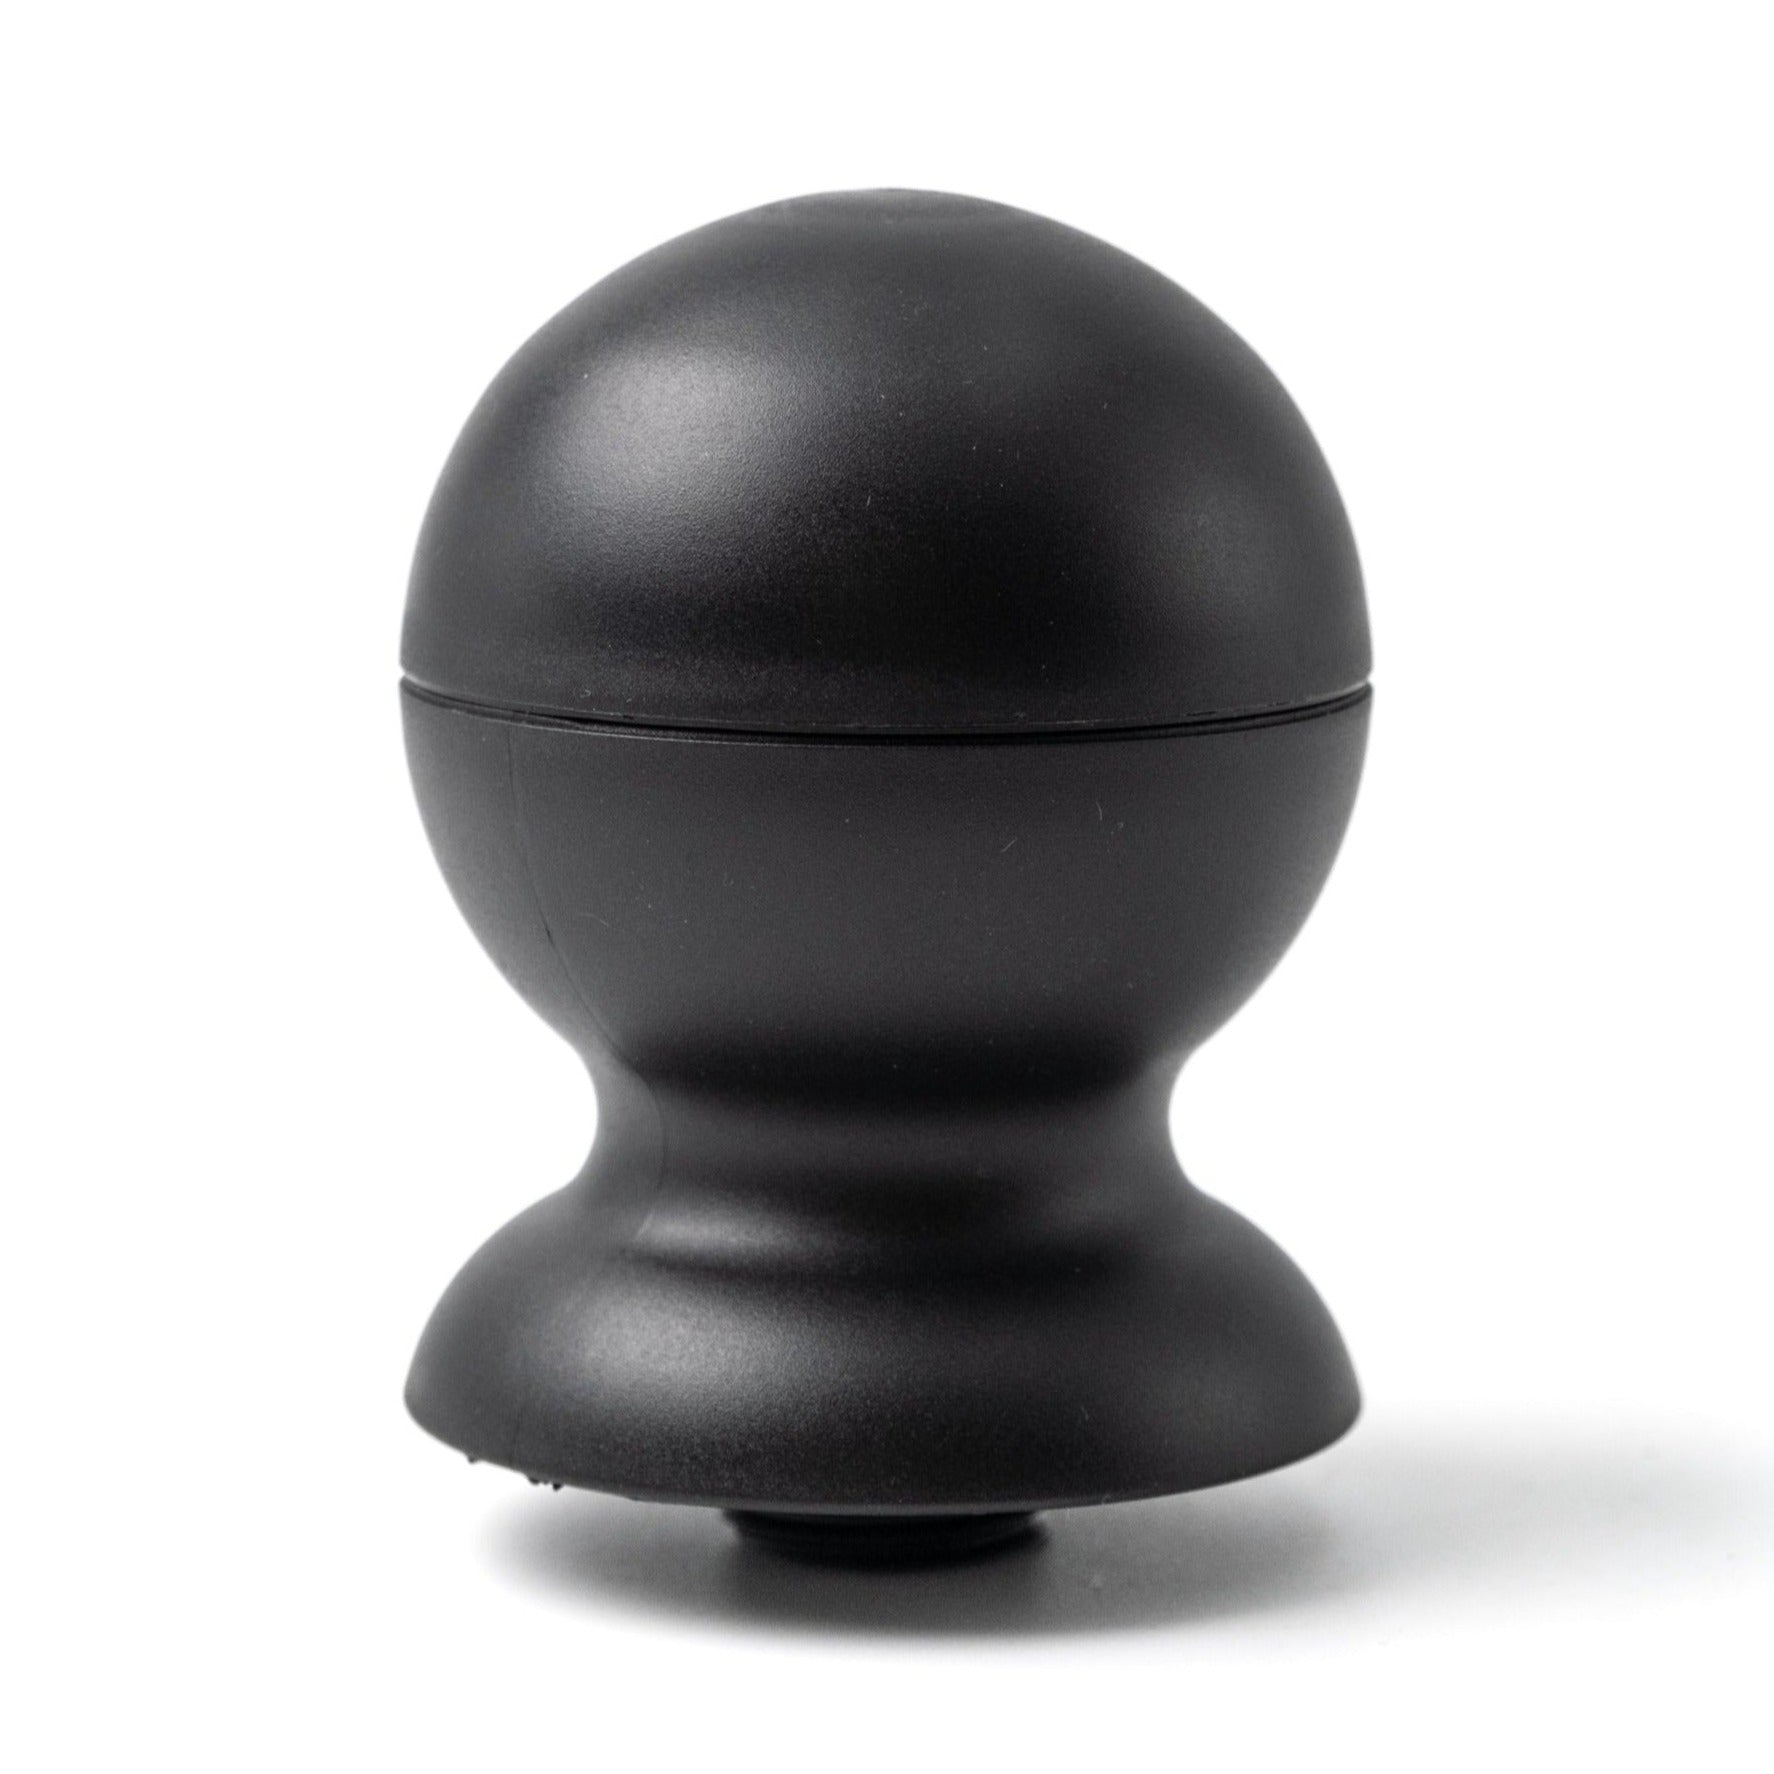 TG, Replacement, Push Button Finial, Black Finish Outdoor Umbrella & Sunshade Accessories 12038215